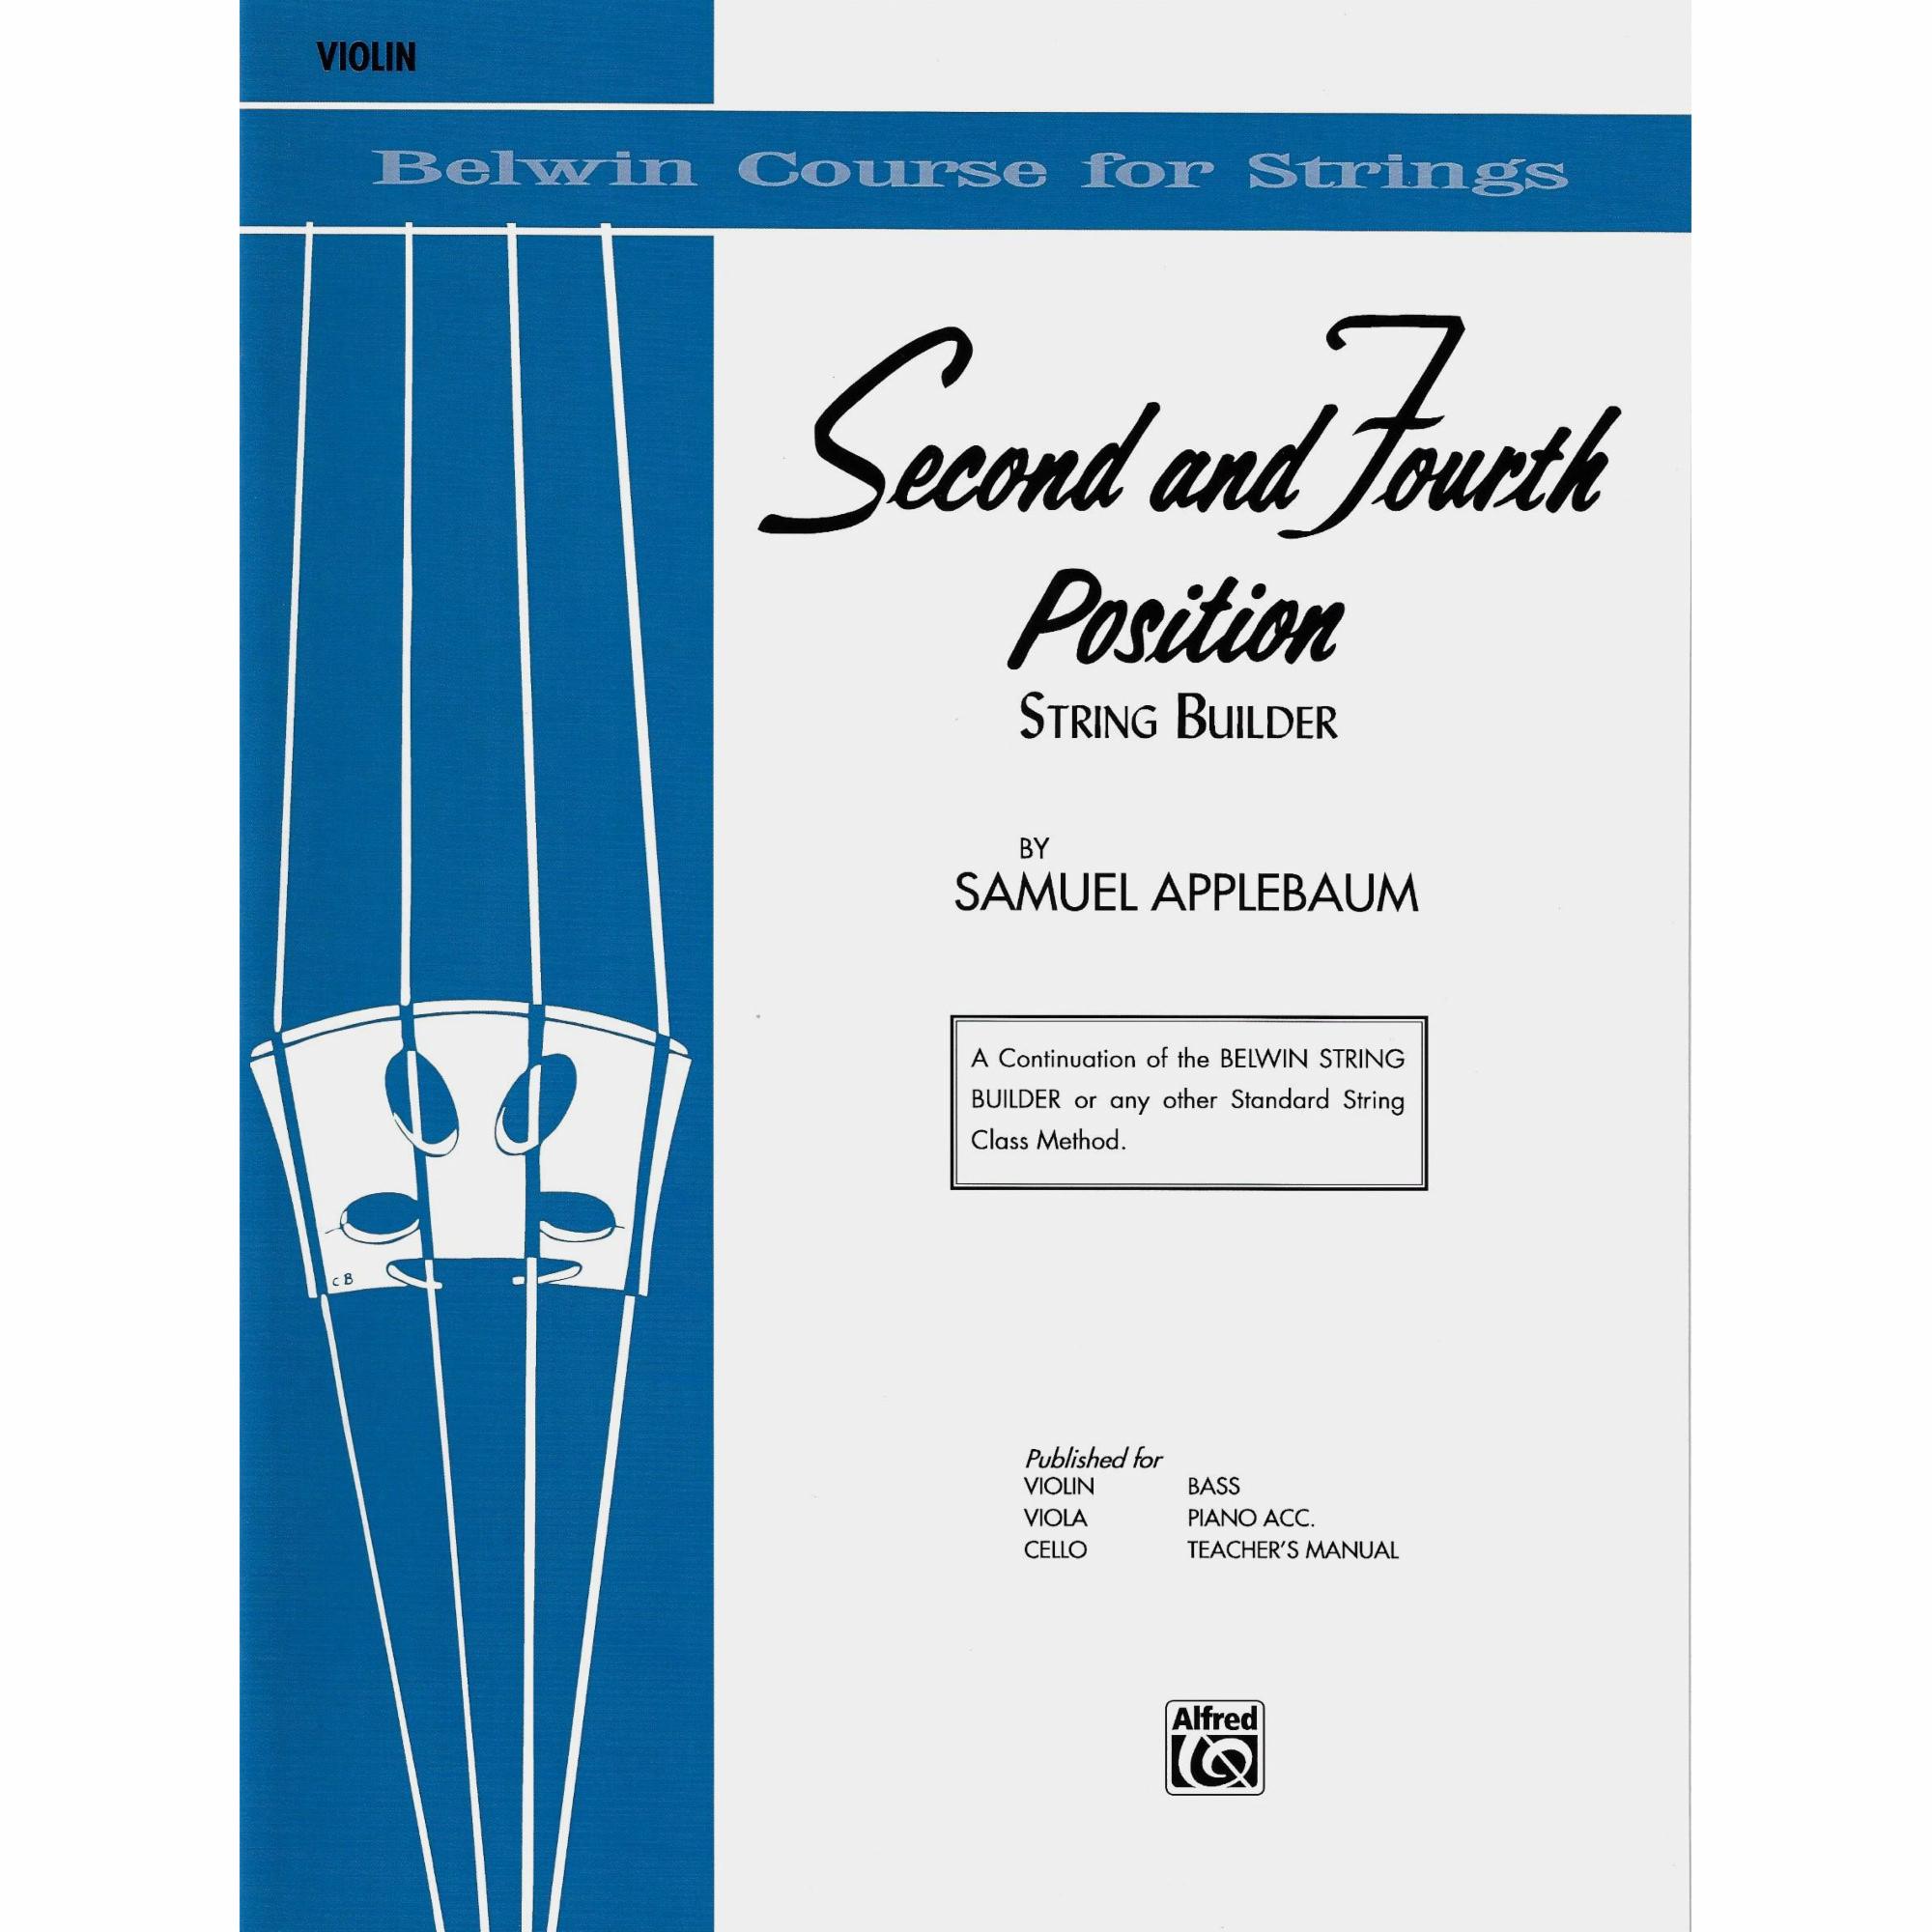 String Builder: Second and Fourth Position